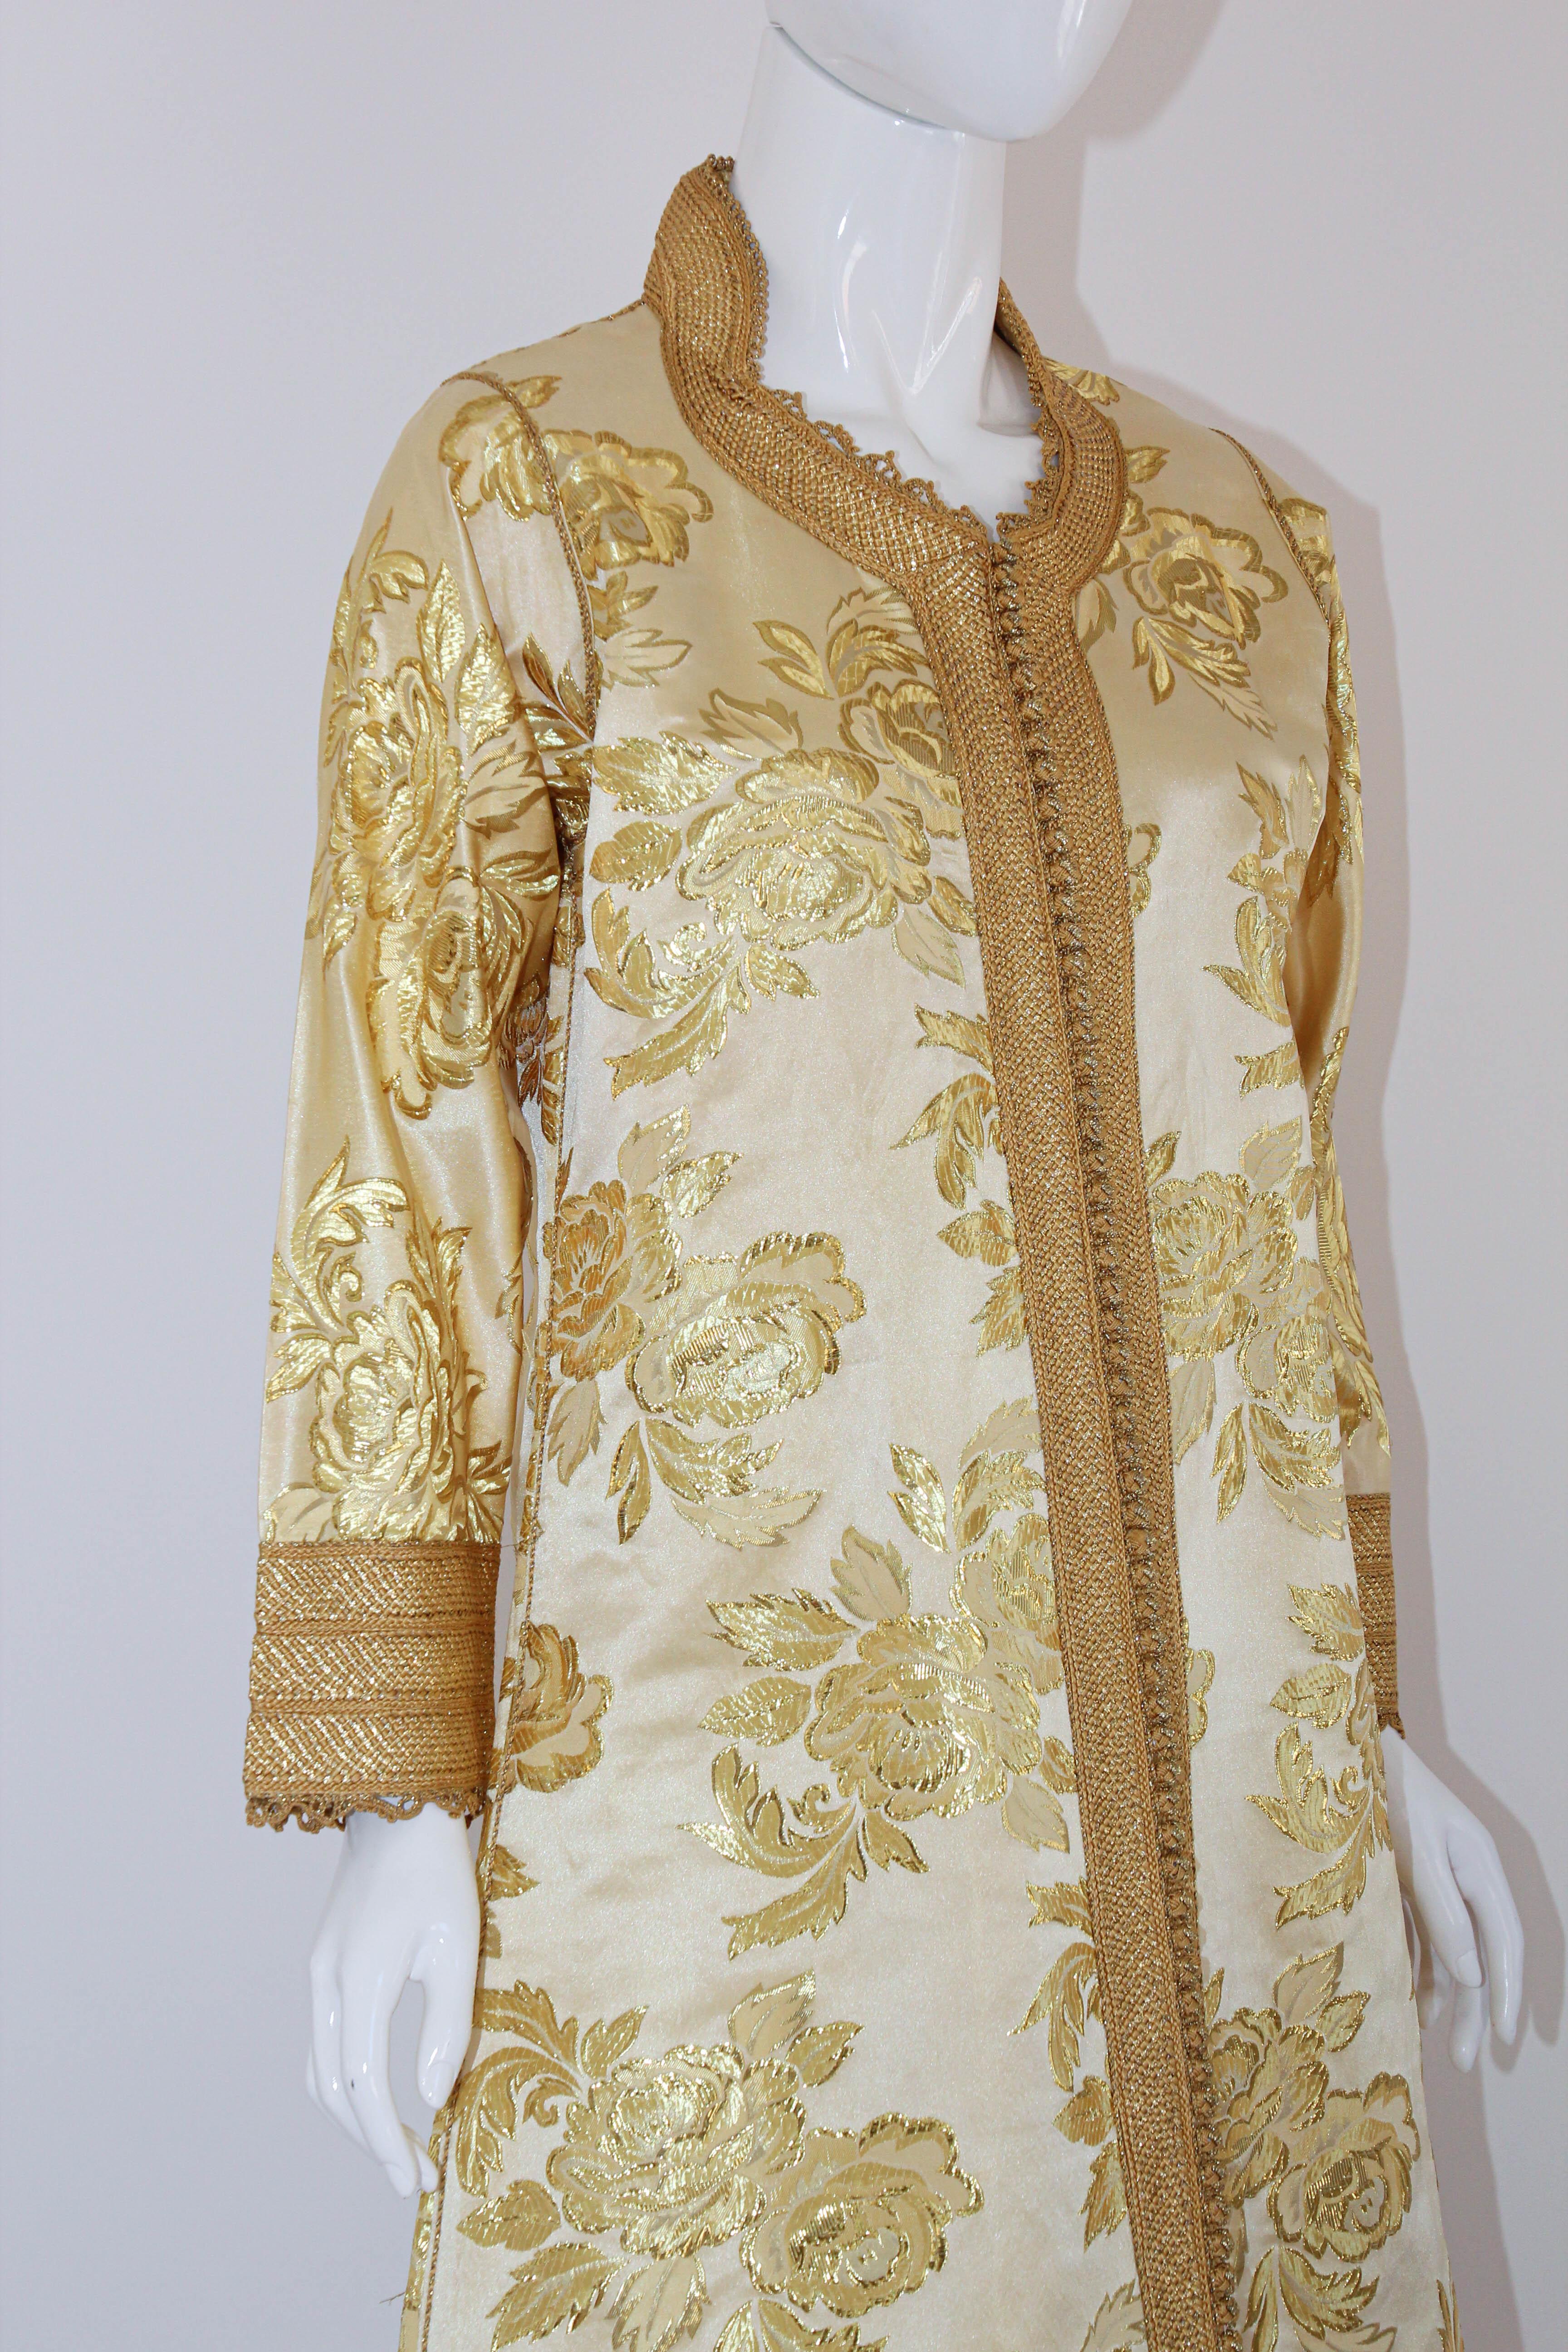 1970 Metallic Gold Brocade Maxi Dress Caftan Vintage Gown Kaftan In Good Condition For Sale In North Hollywood, CA